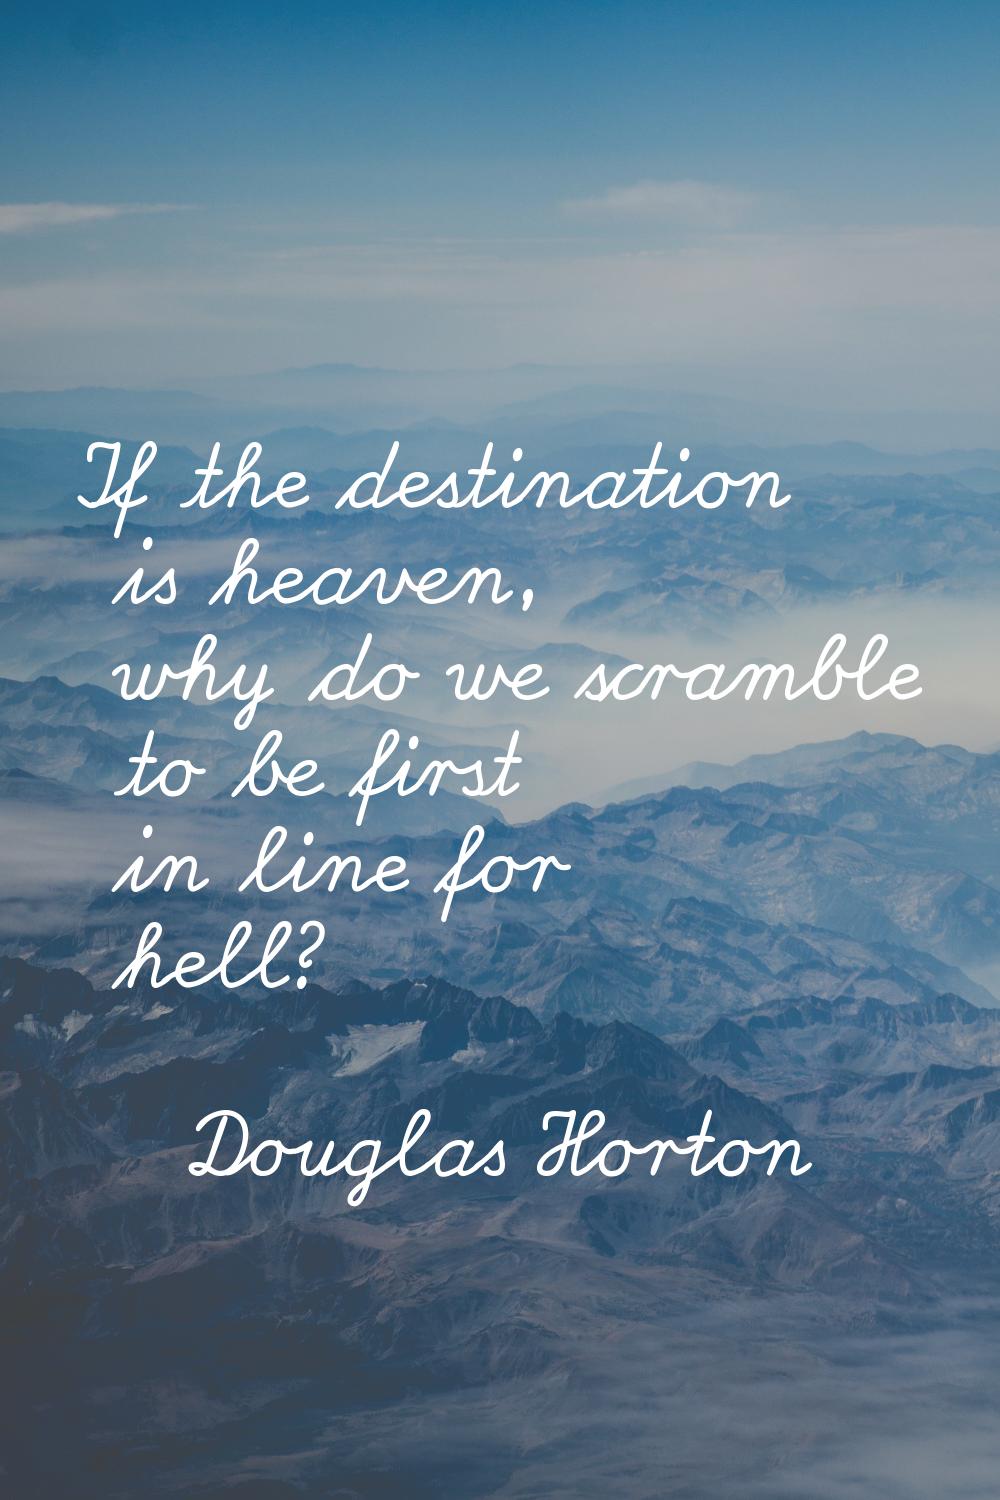 If the destination is heaven, why do we scramble to be first in line for hell?